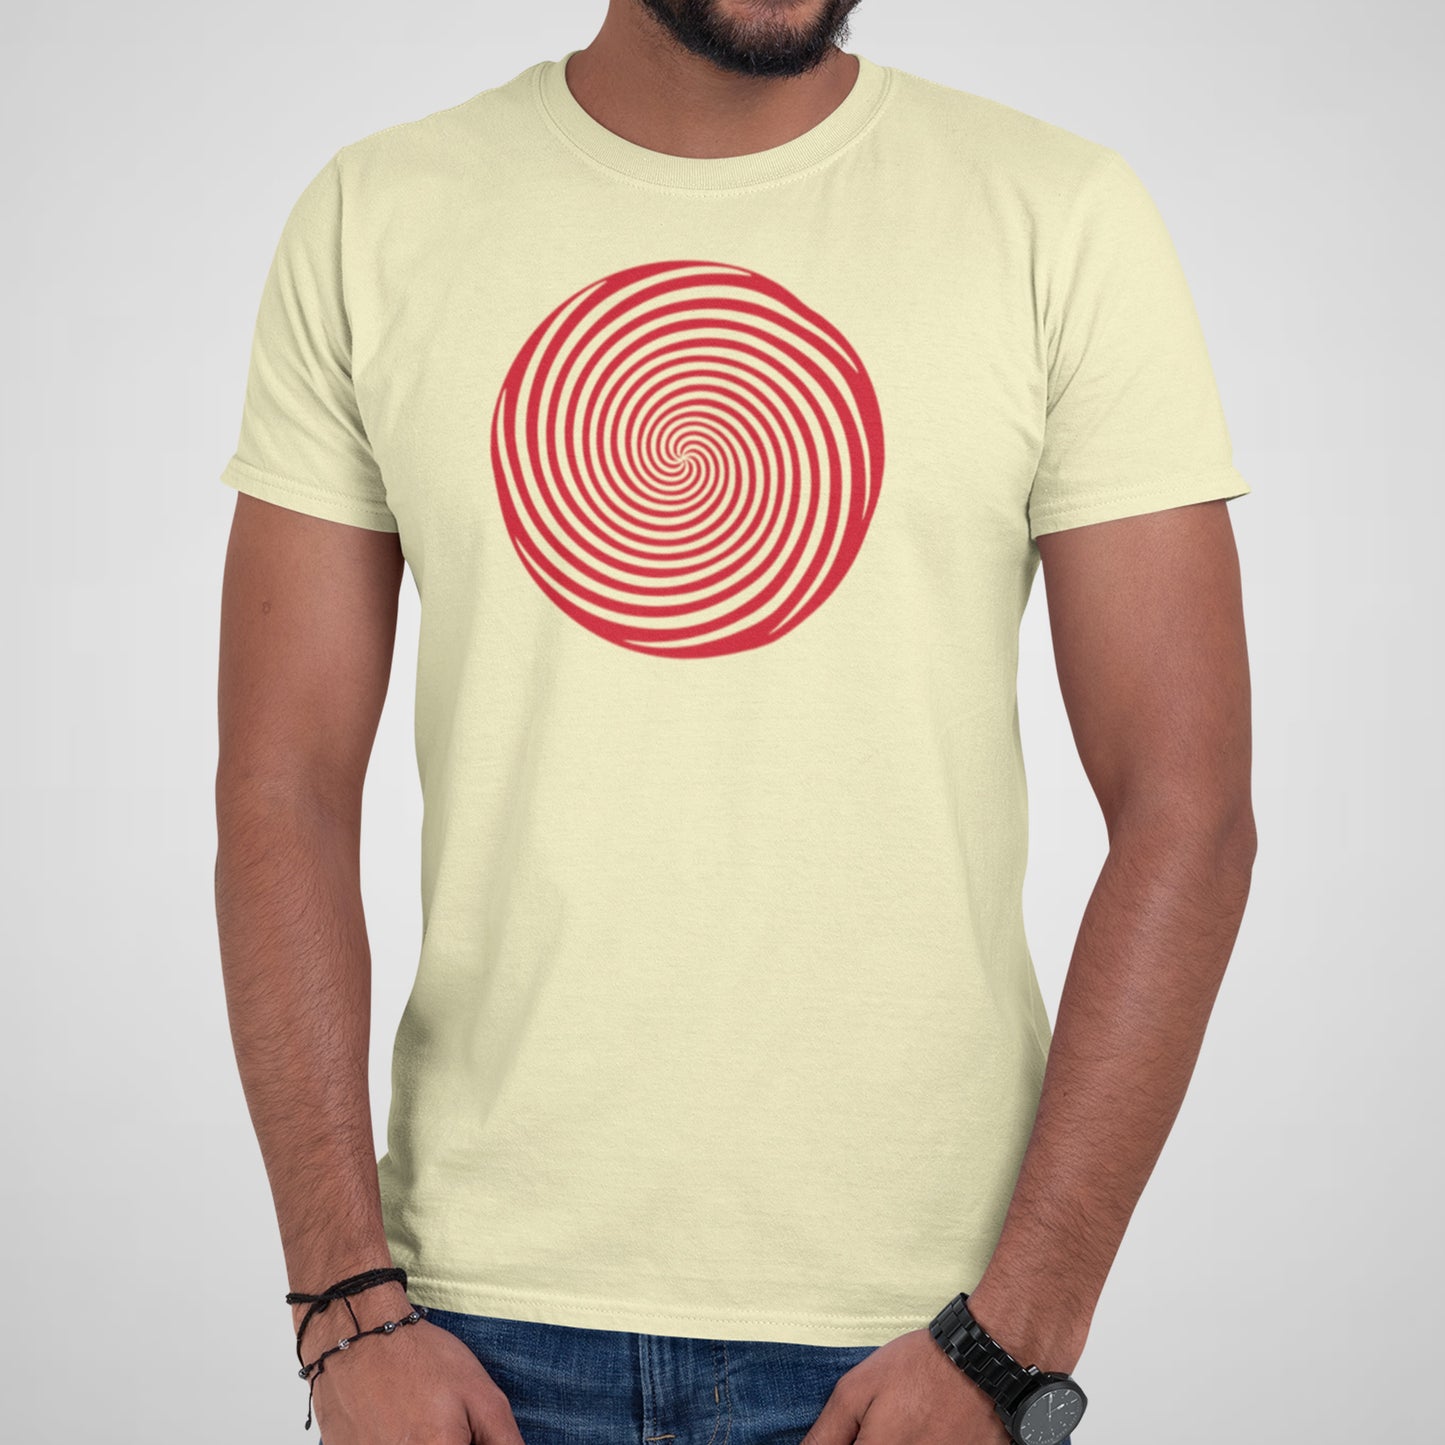 Hypnotize Me in Banana Cream | Men's Fitted Cotton Crew Neck Graphic Tee